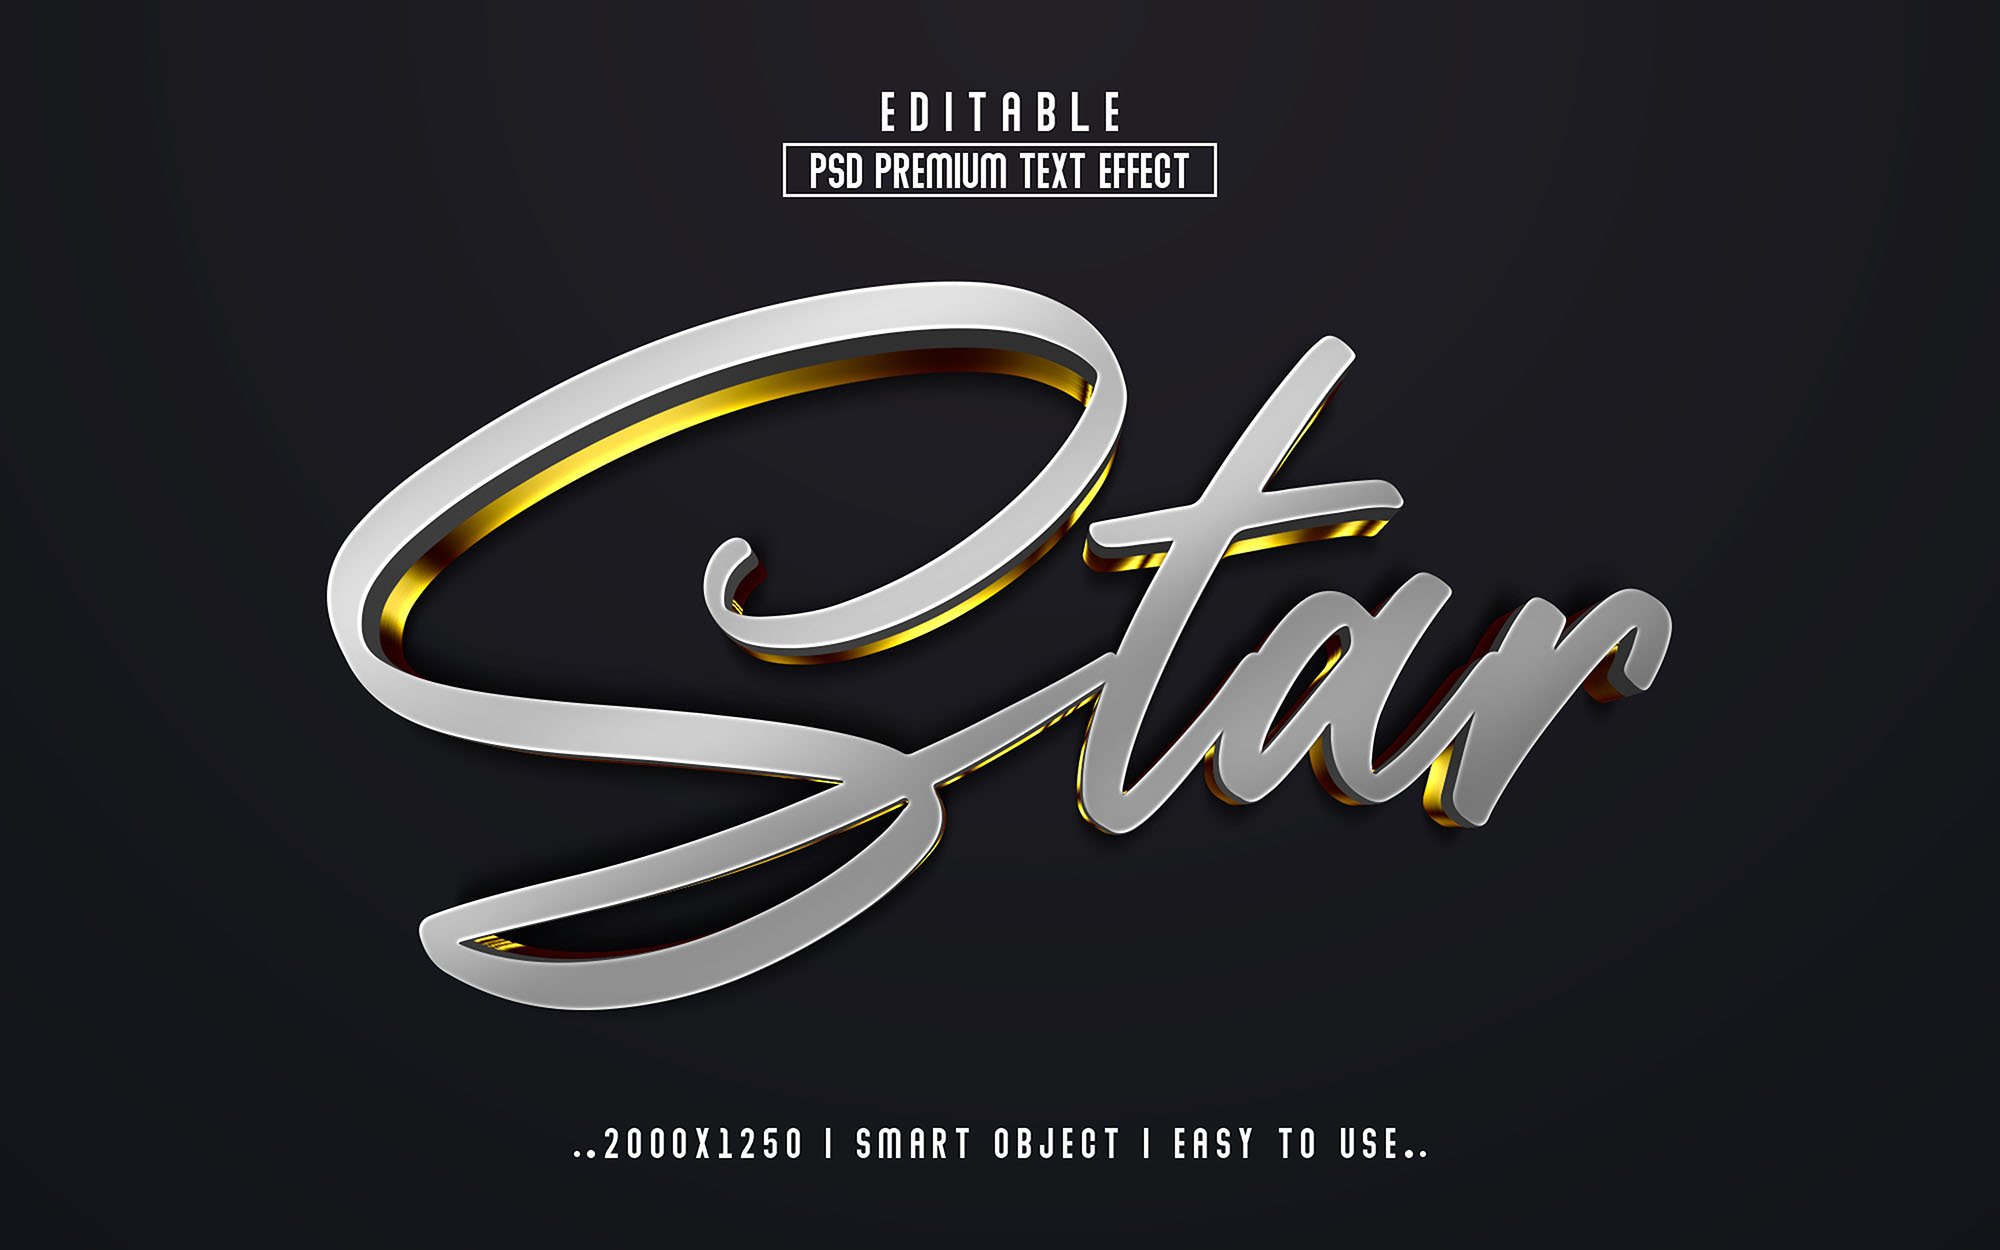 Star 3D Editable Text Effect Stylecover image.